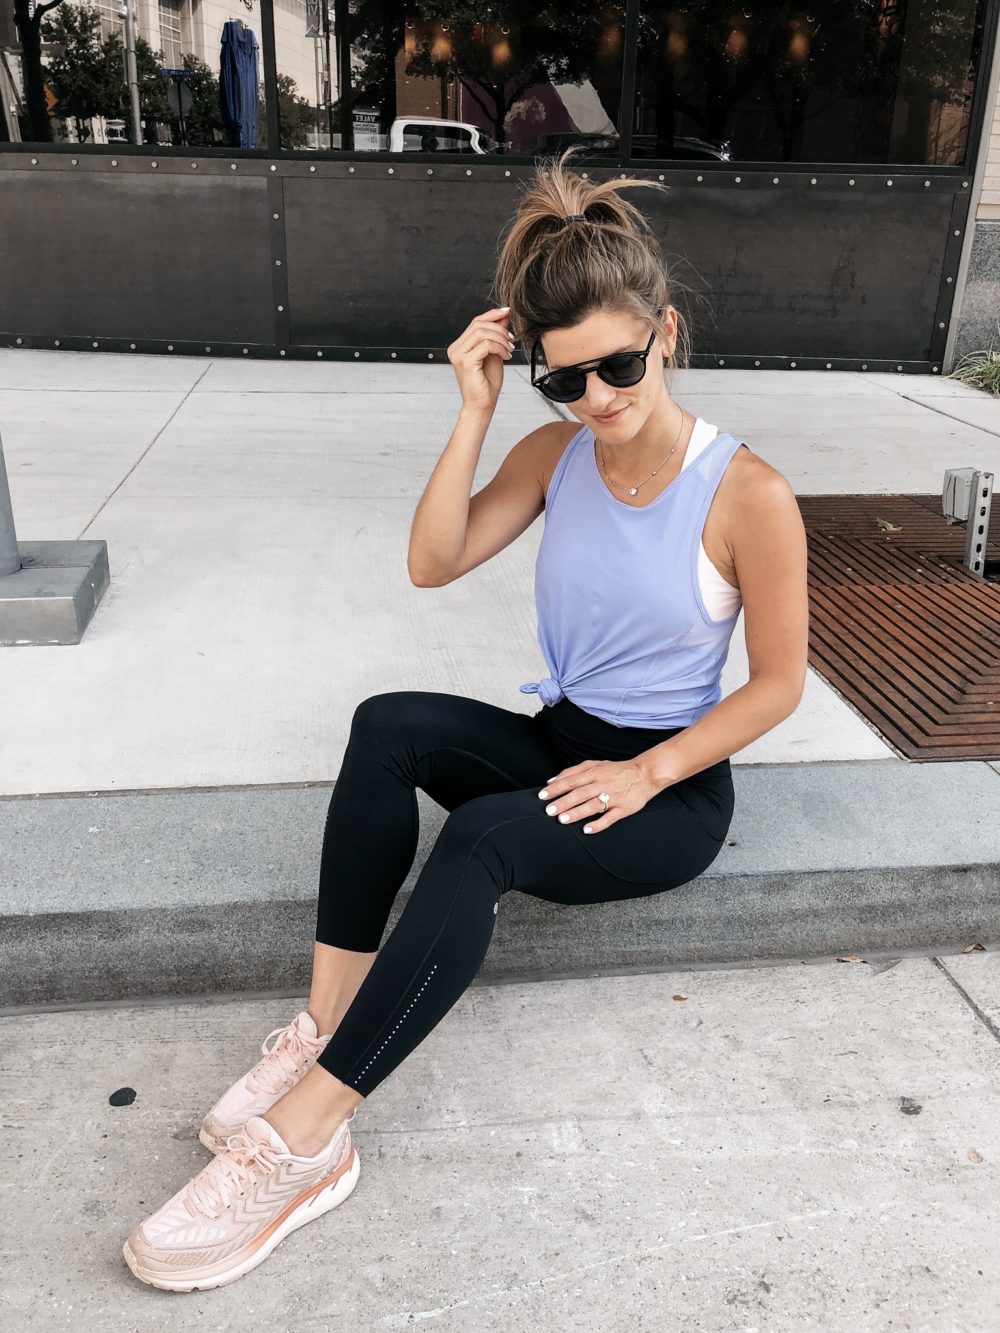 lululemon workout outfit fast and free leggings, brighton keller workout outfit